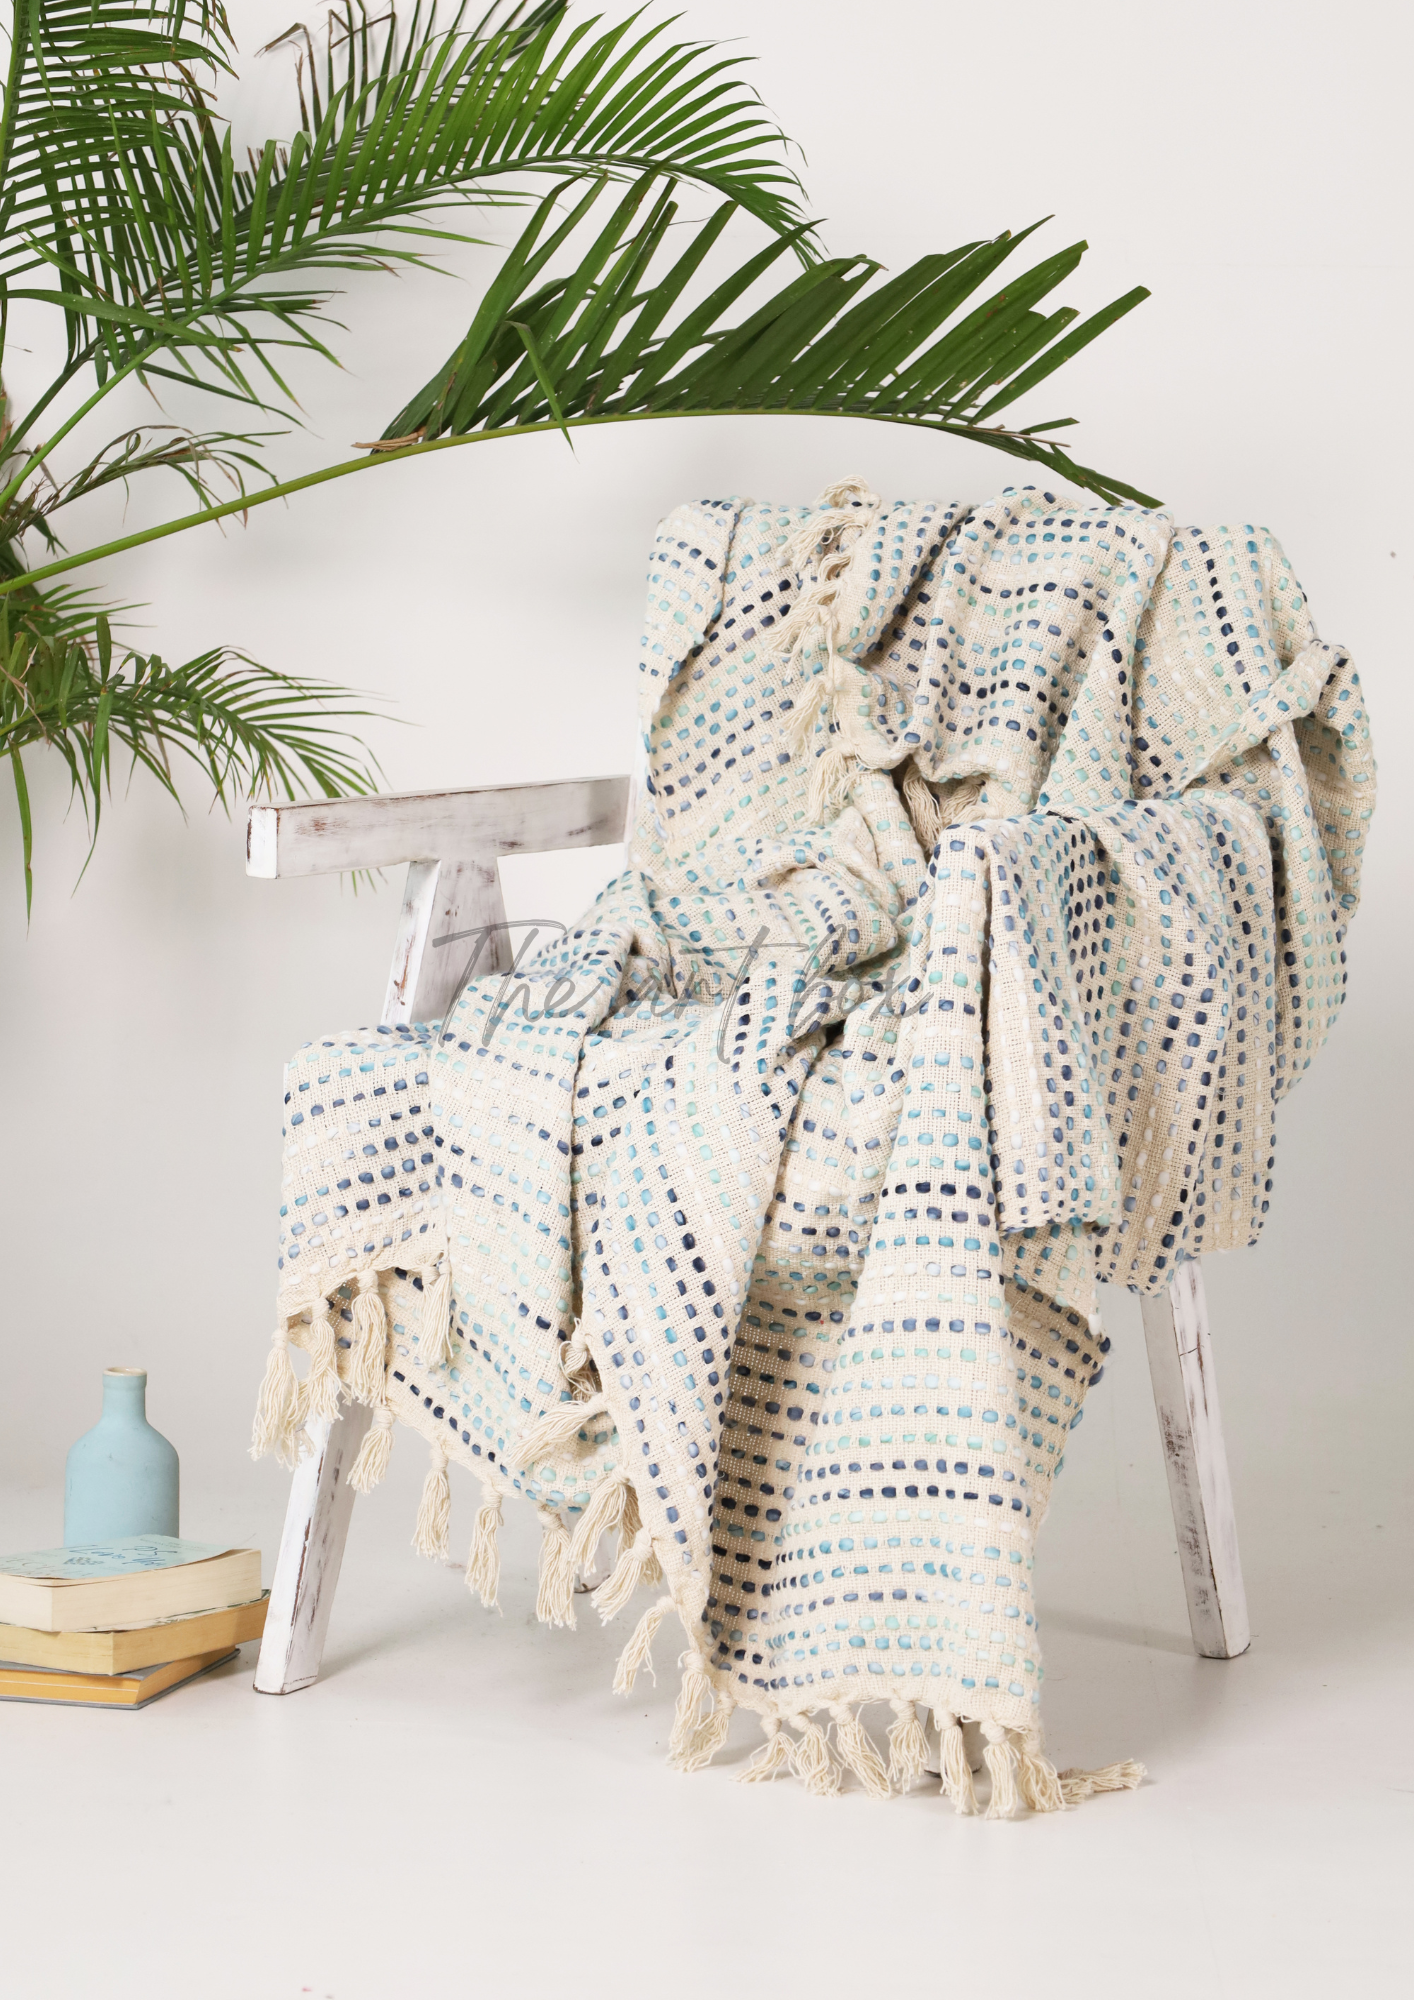 Shades of Blue Handwoven Throws